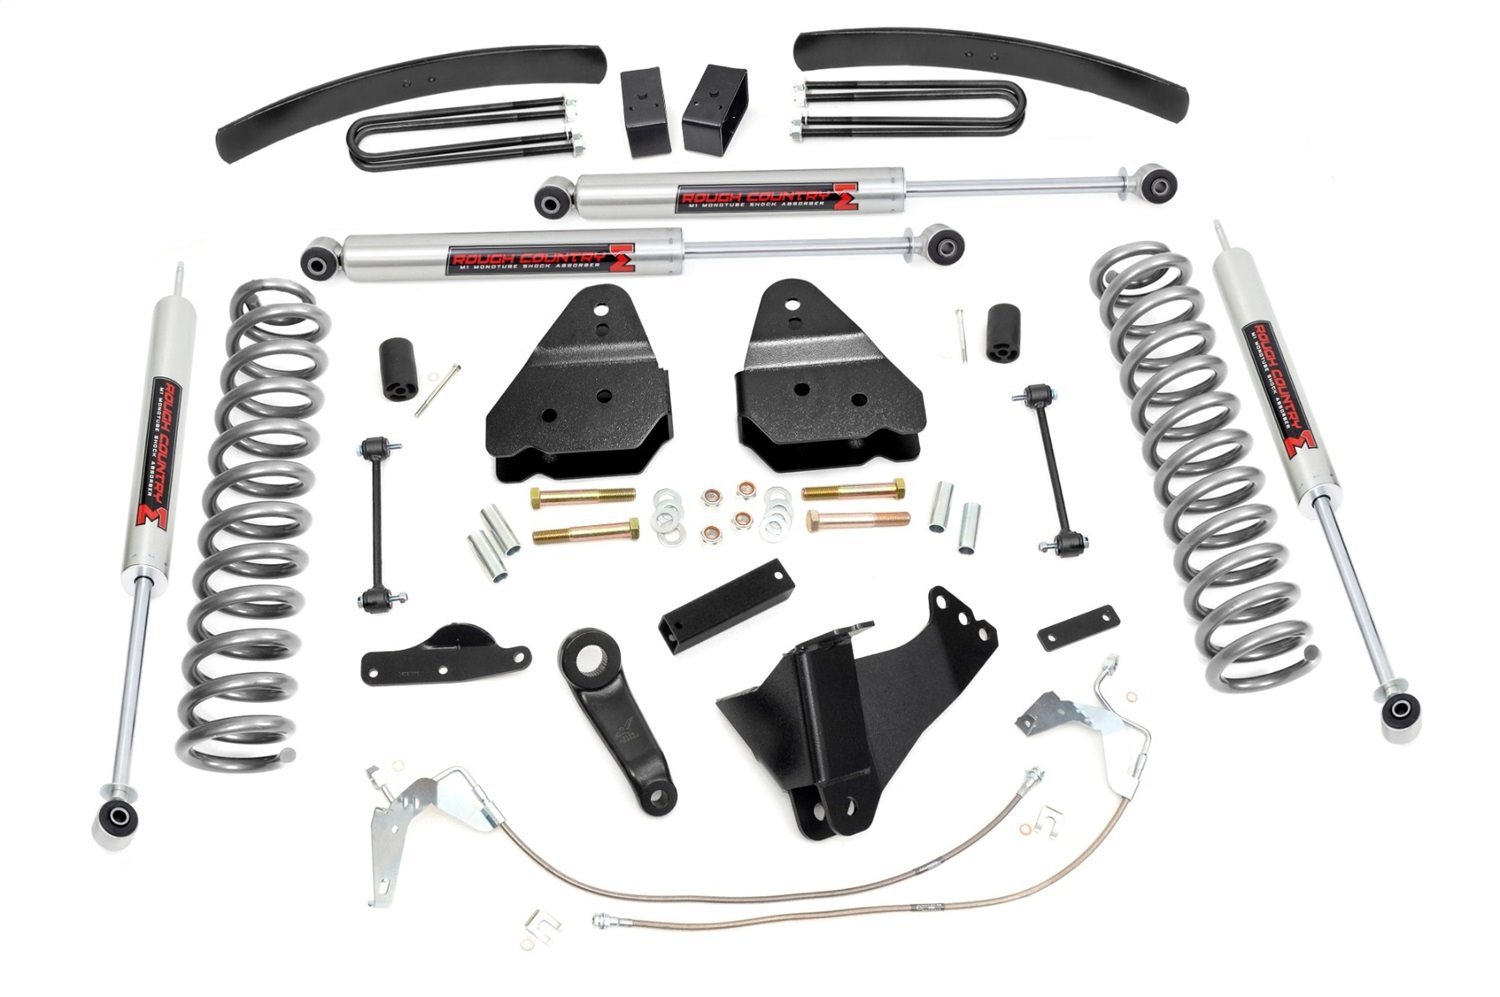 59740 6 in. Lift Kit, Gas, M1, Ford Super Duty 4WD (2008-2010)